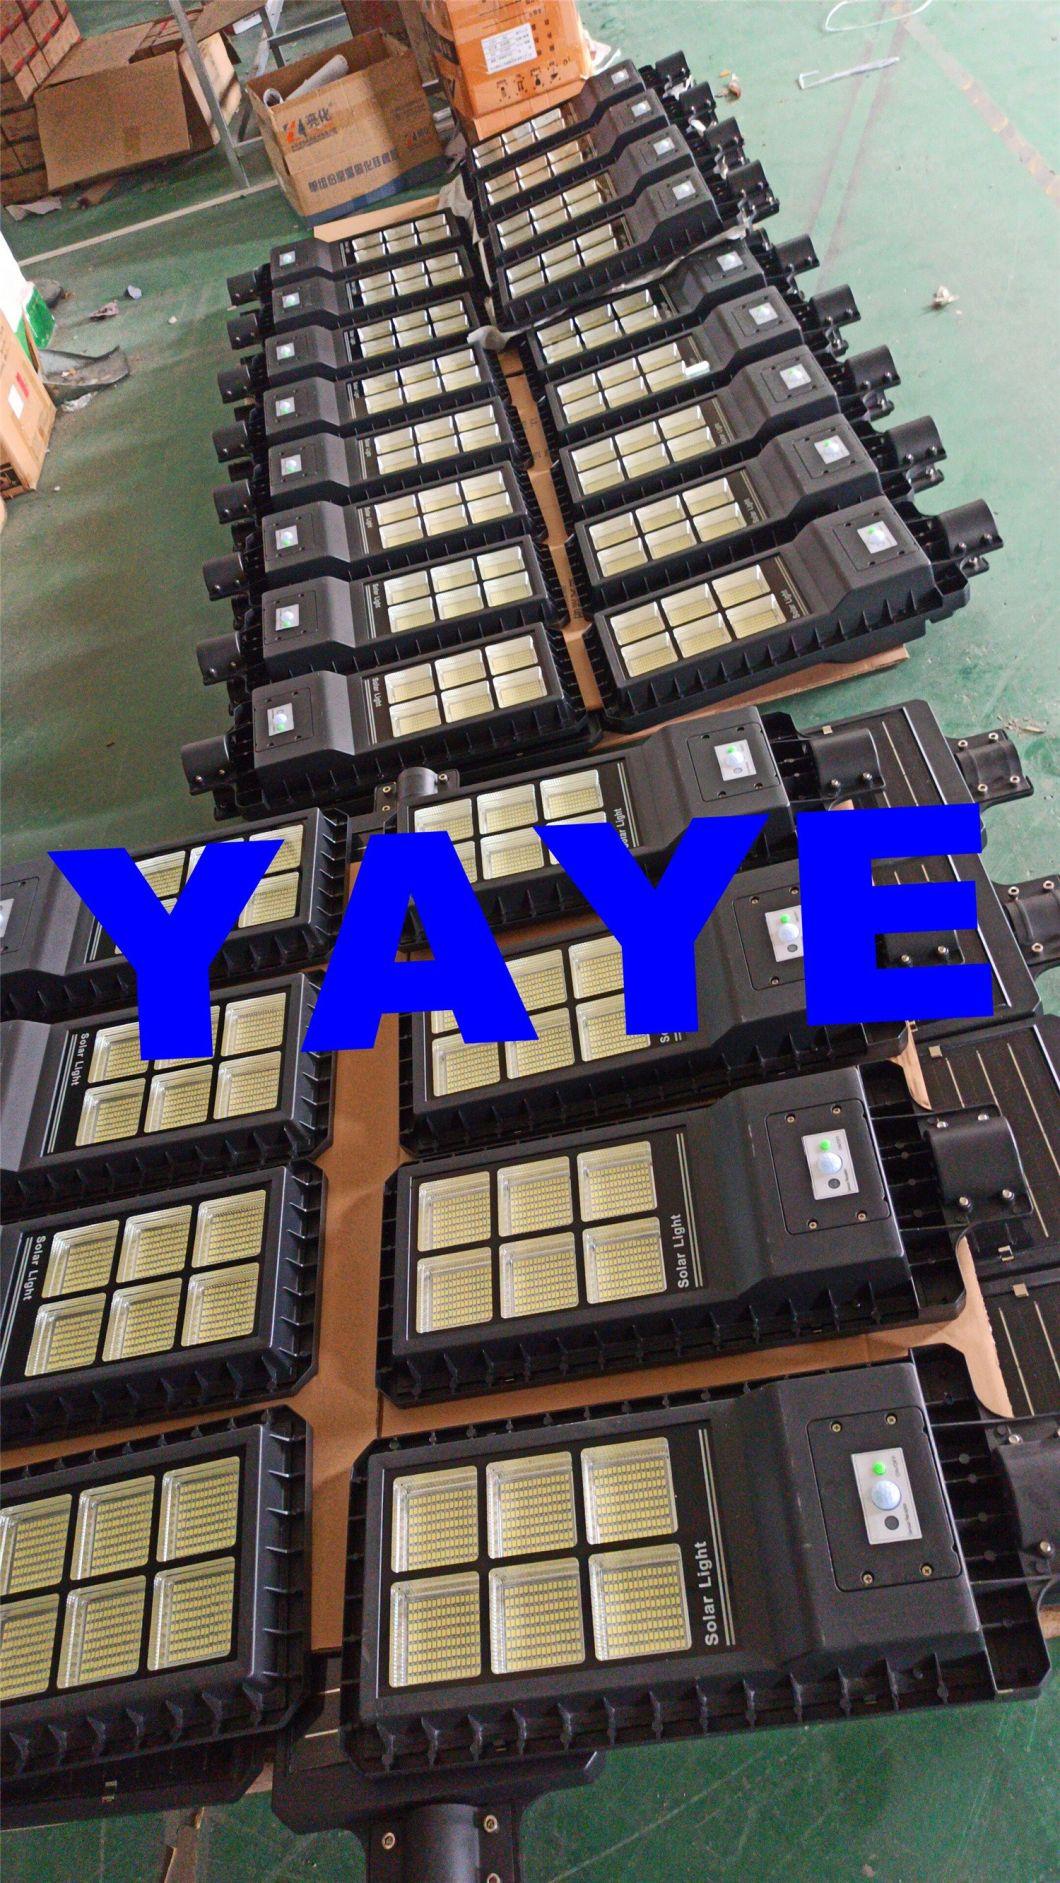 Yaye 2021 Hot Sell 40ah Battery 300W/200W/100W All in One Solar Street Lights with Remote Controller